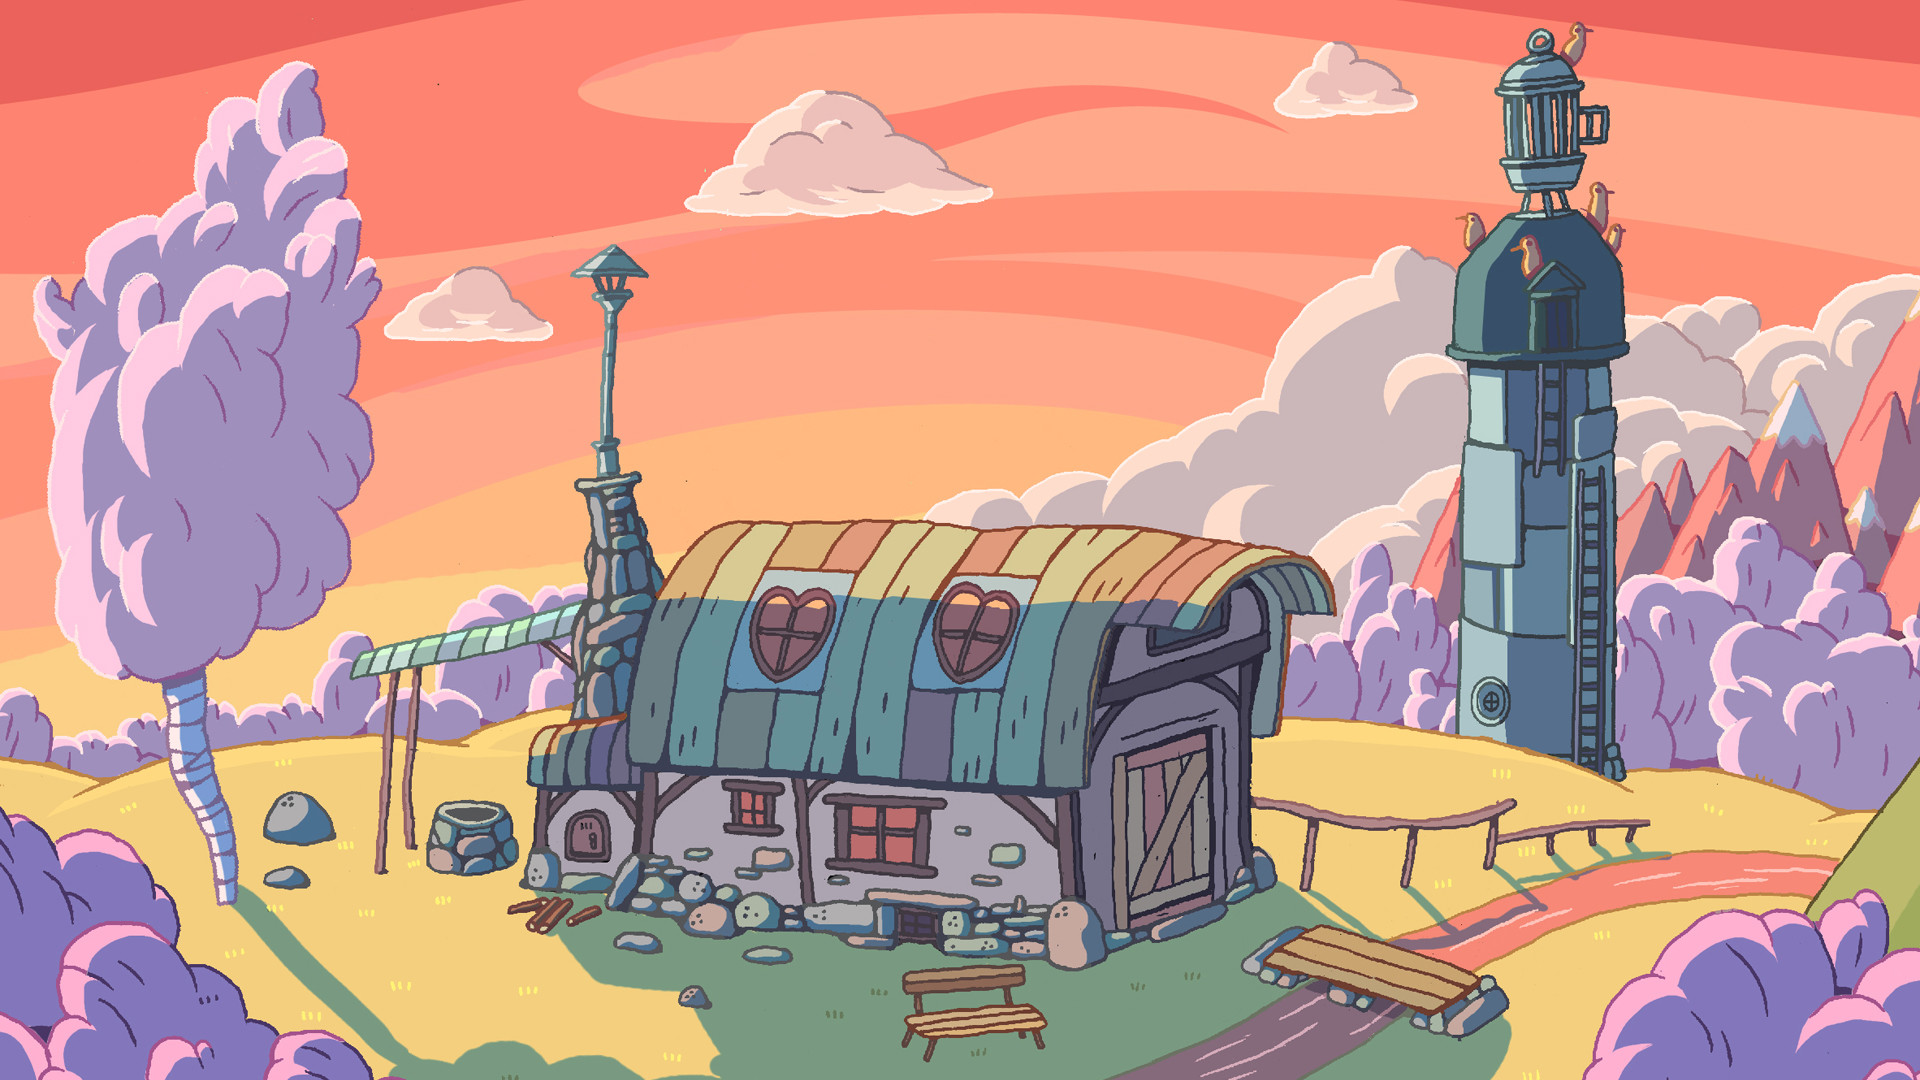 1920x1080 free Adventure Time wallpaper, resolution : 1920 x tags: Adventure, Time.